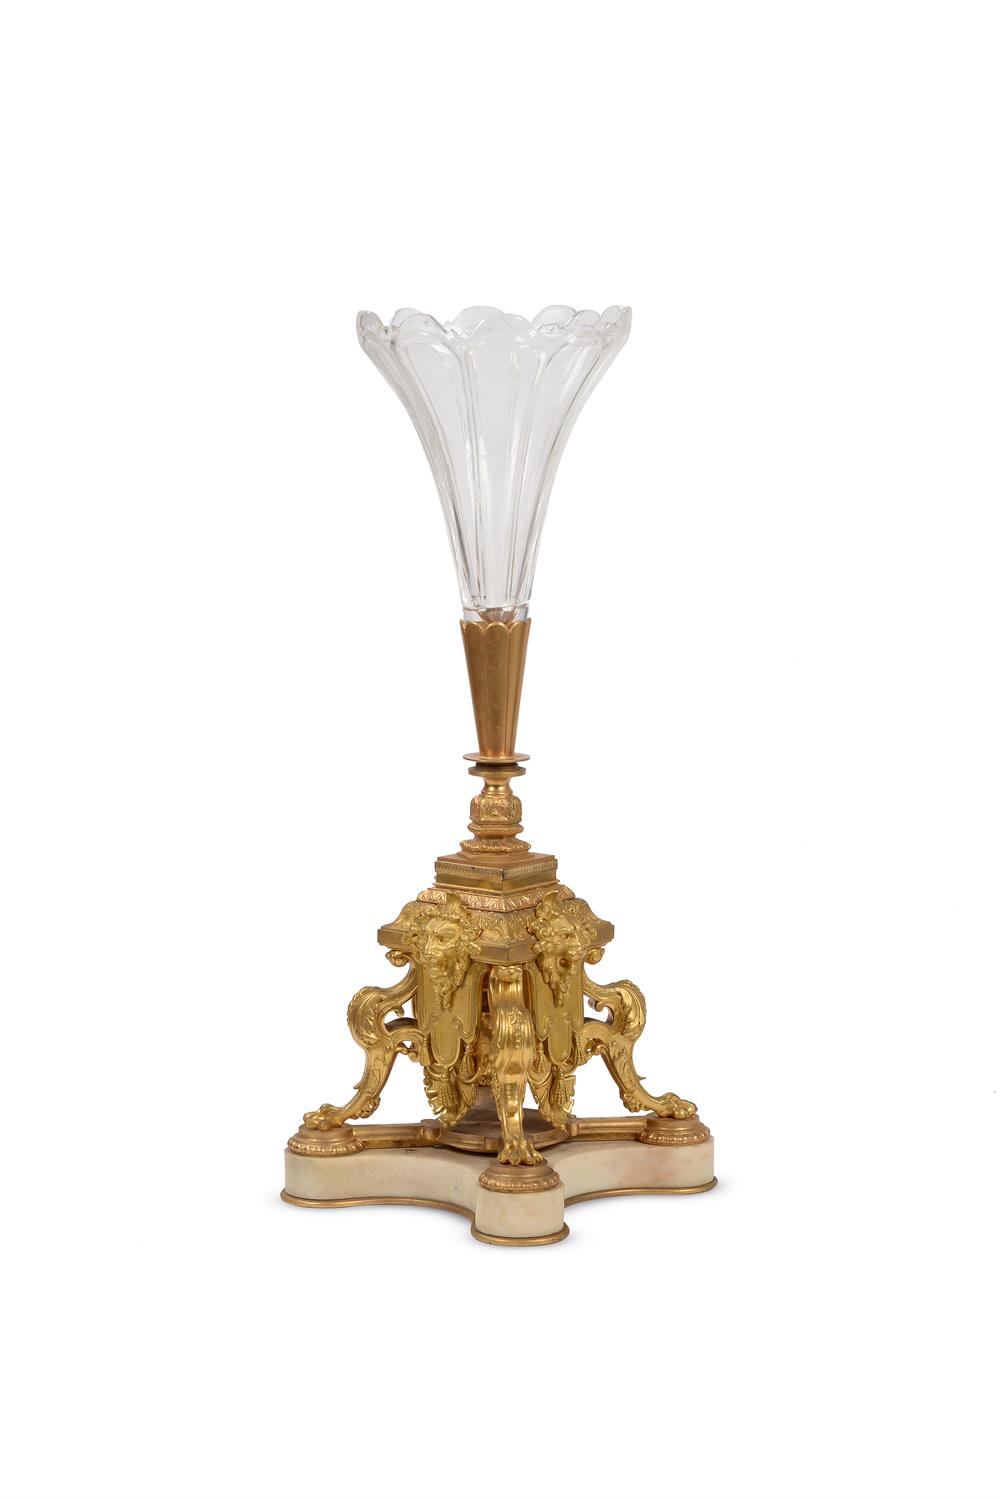 A French gilt bronze, cut glass and white marble mounted centre piece, third quarter 19th century - Image 2 of 4